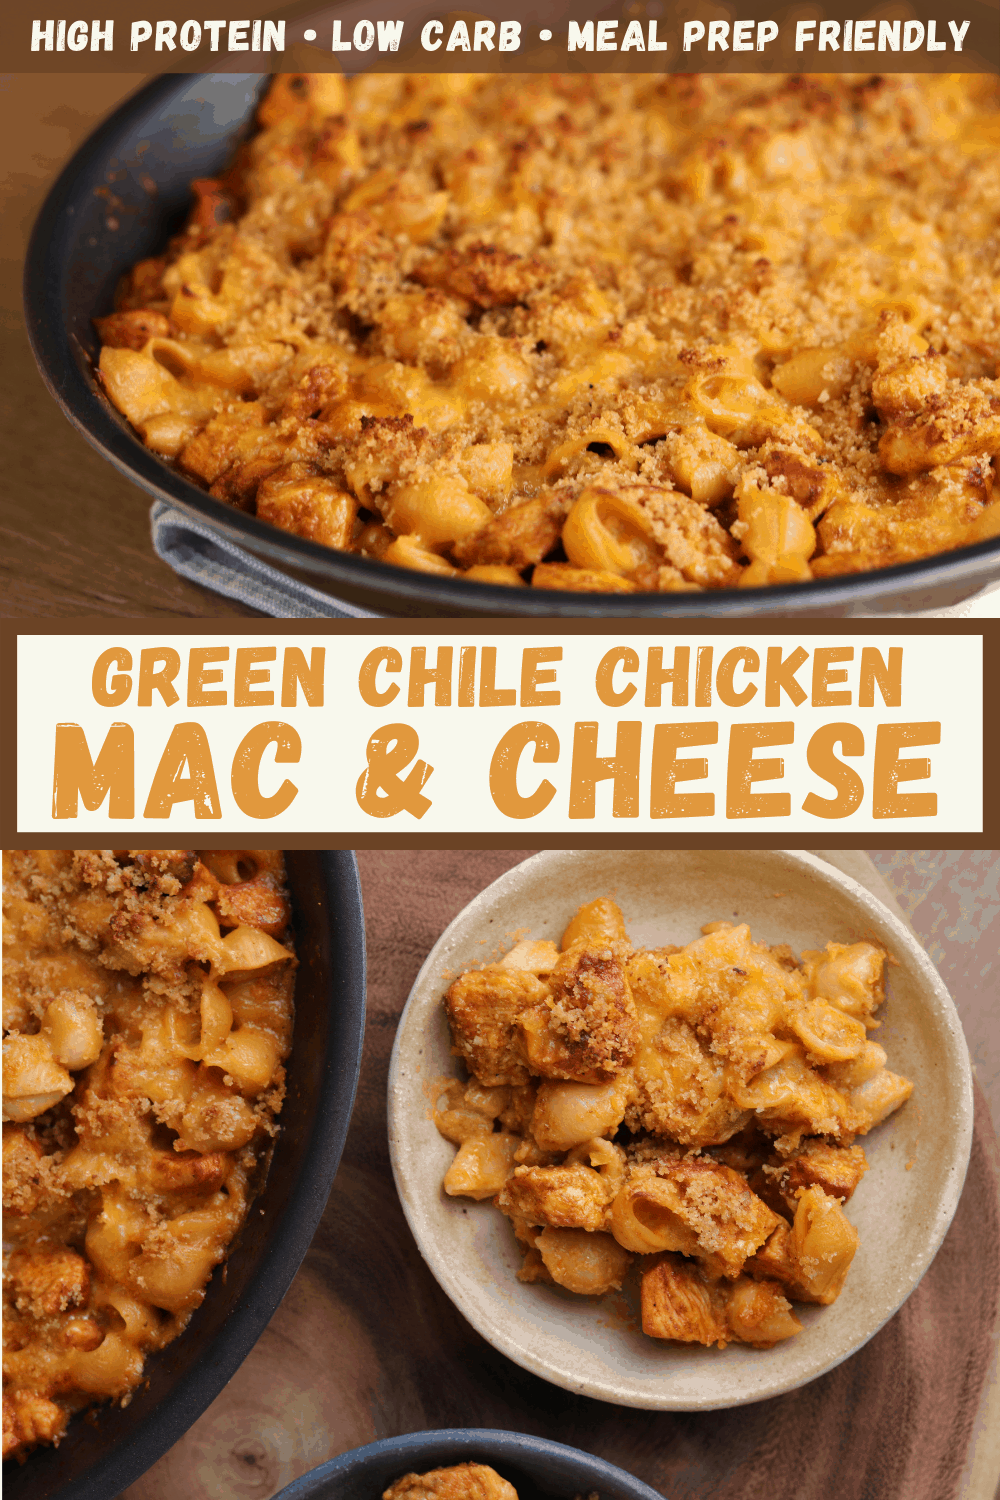 Green Chile Mac and Cheese with Chicken - Kinda Healthy Recipes